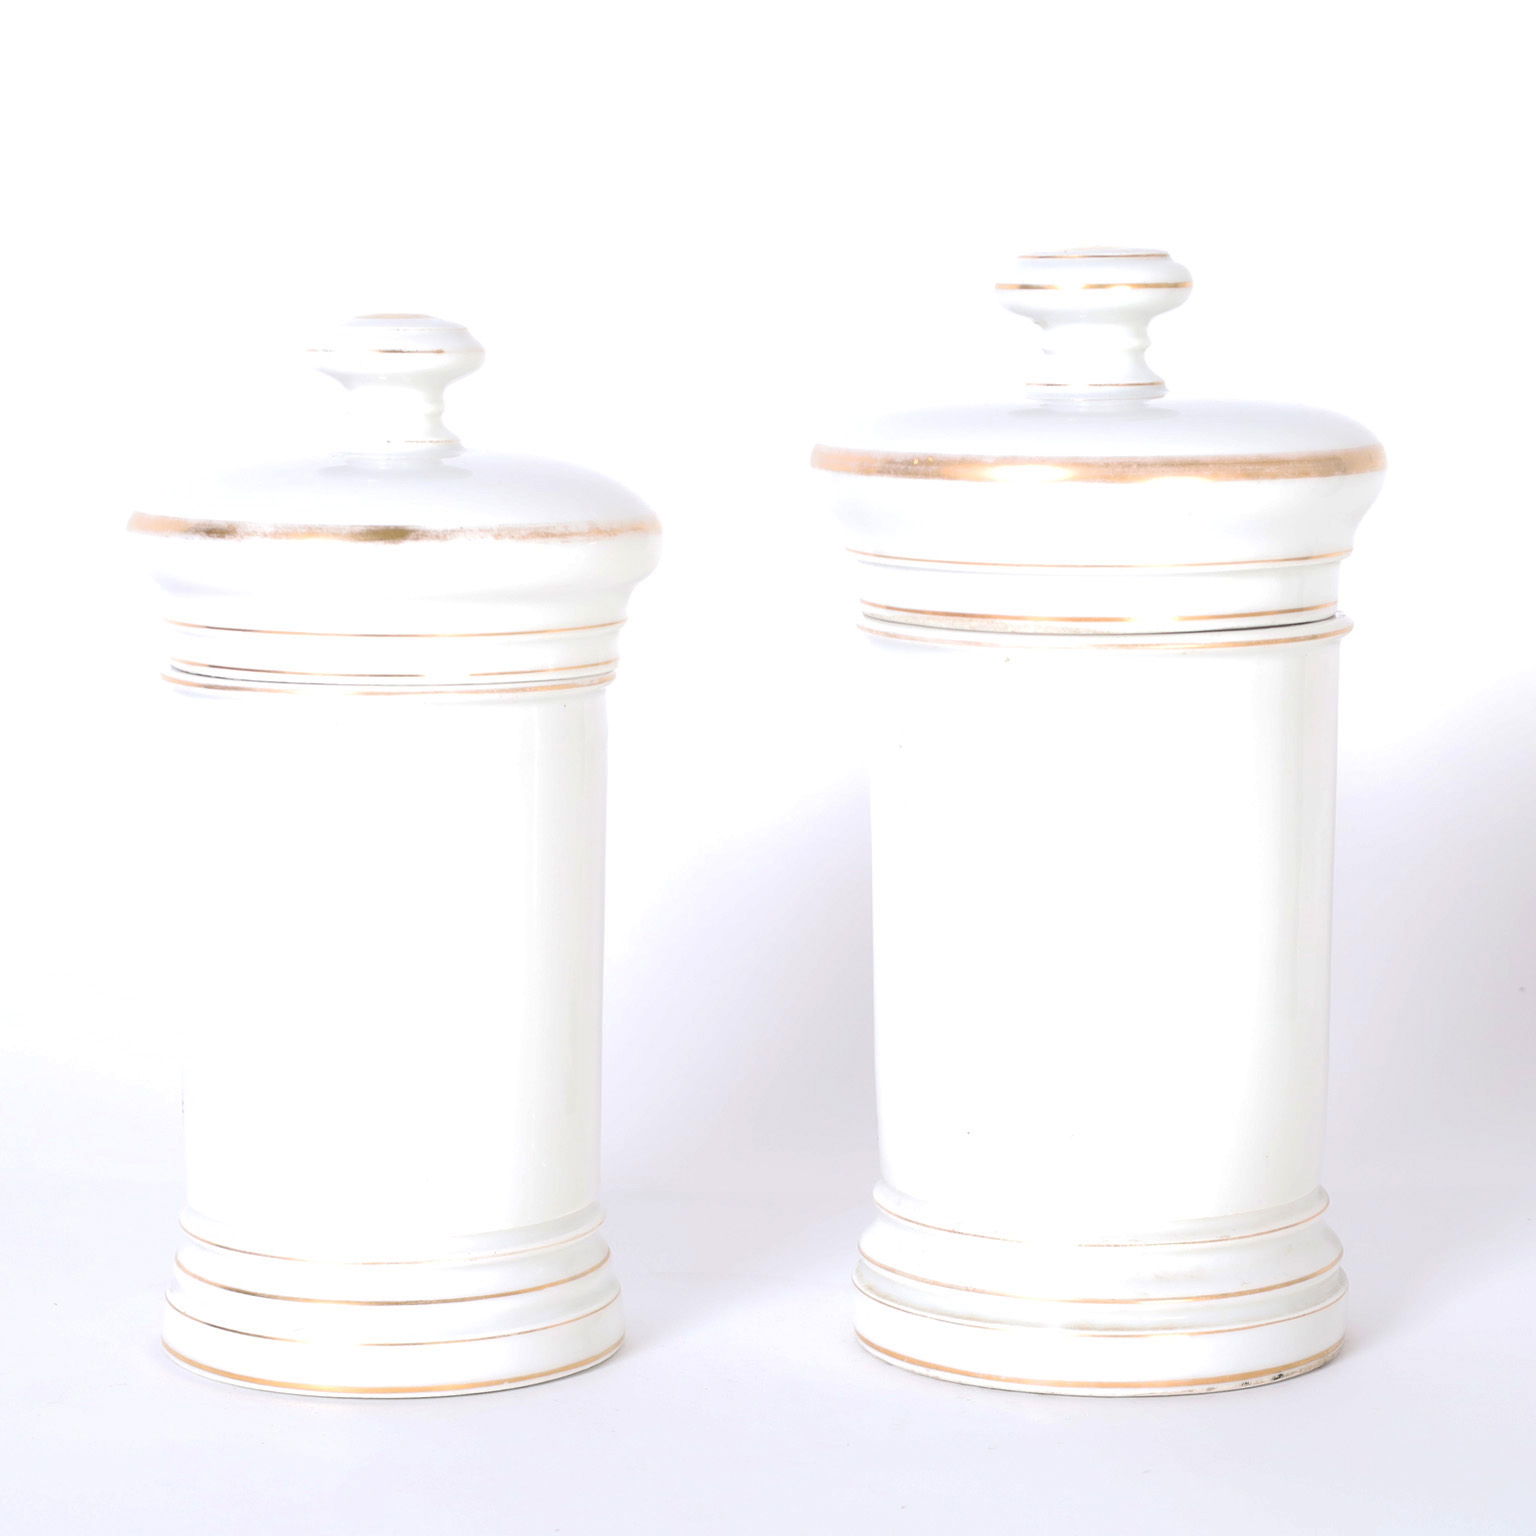 Near Pair of Antique French Porcelain Apothecary Lidded Jars